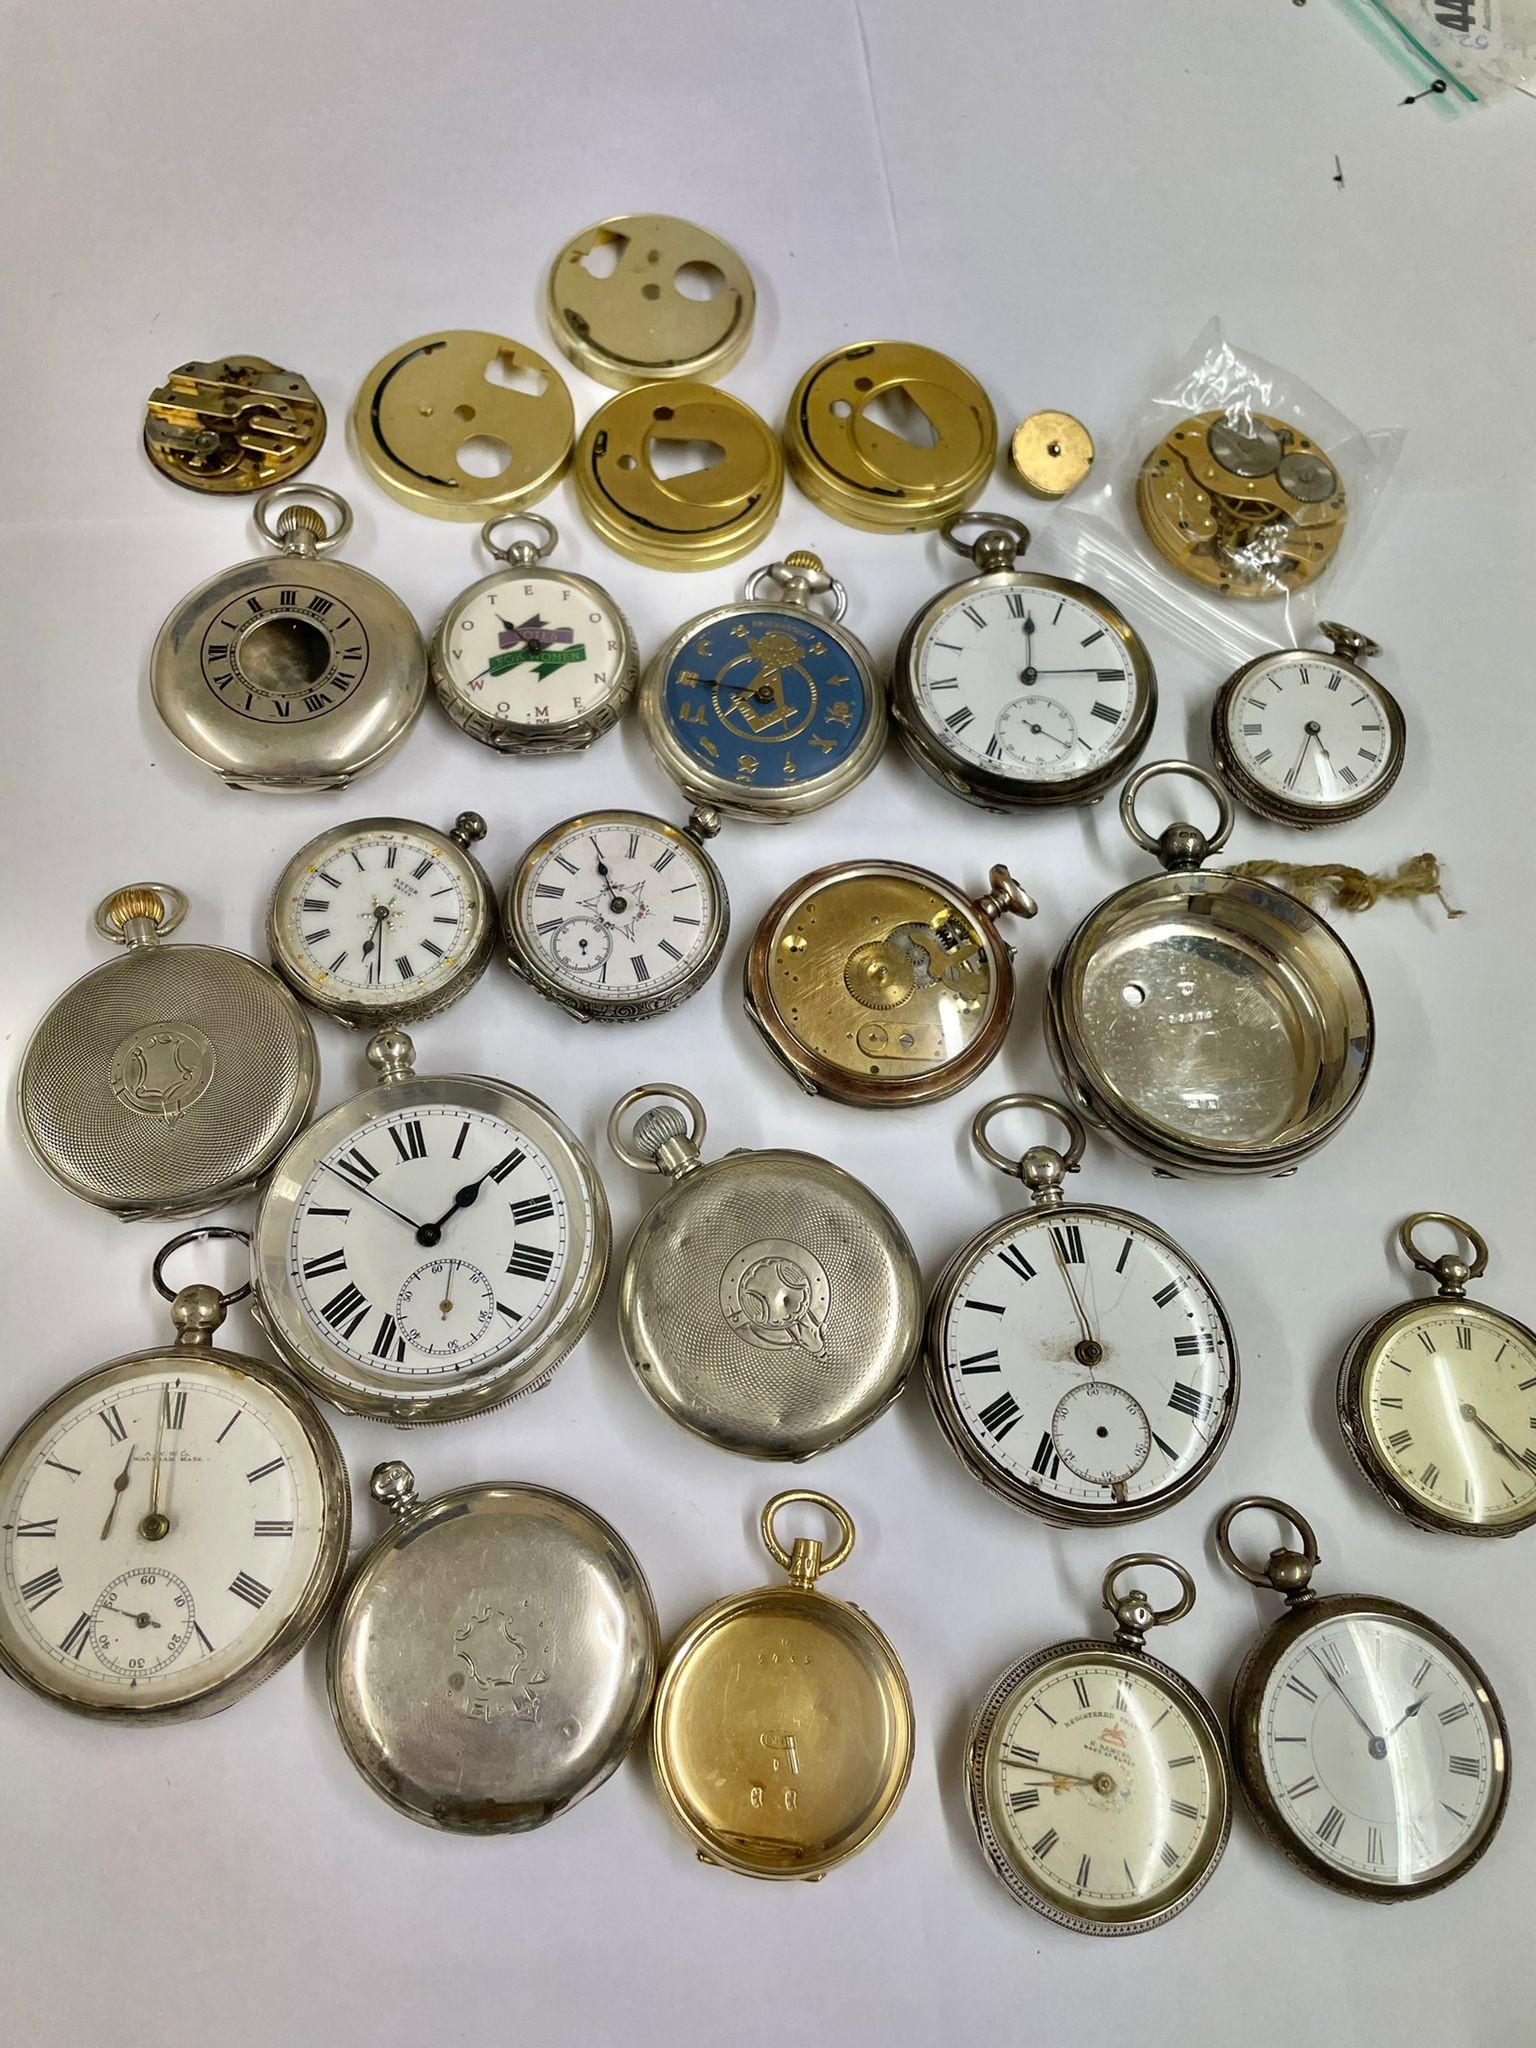 Antique & vintage silver pocket watches fusee, Waltham etc some ticking sold as found - Image 9 of 11